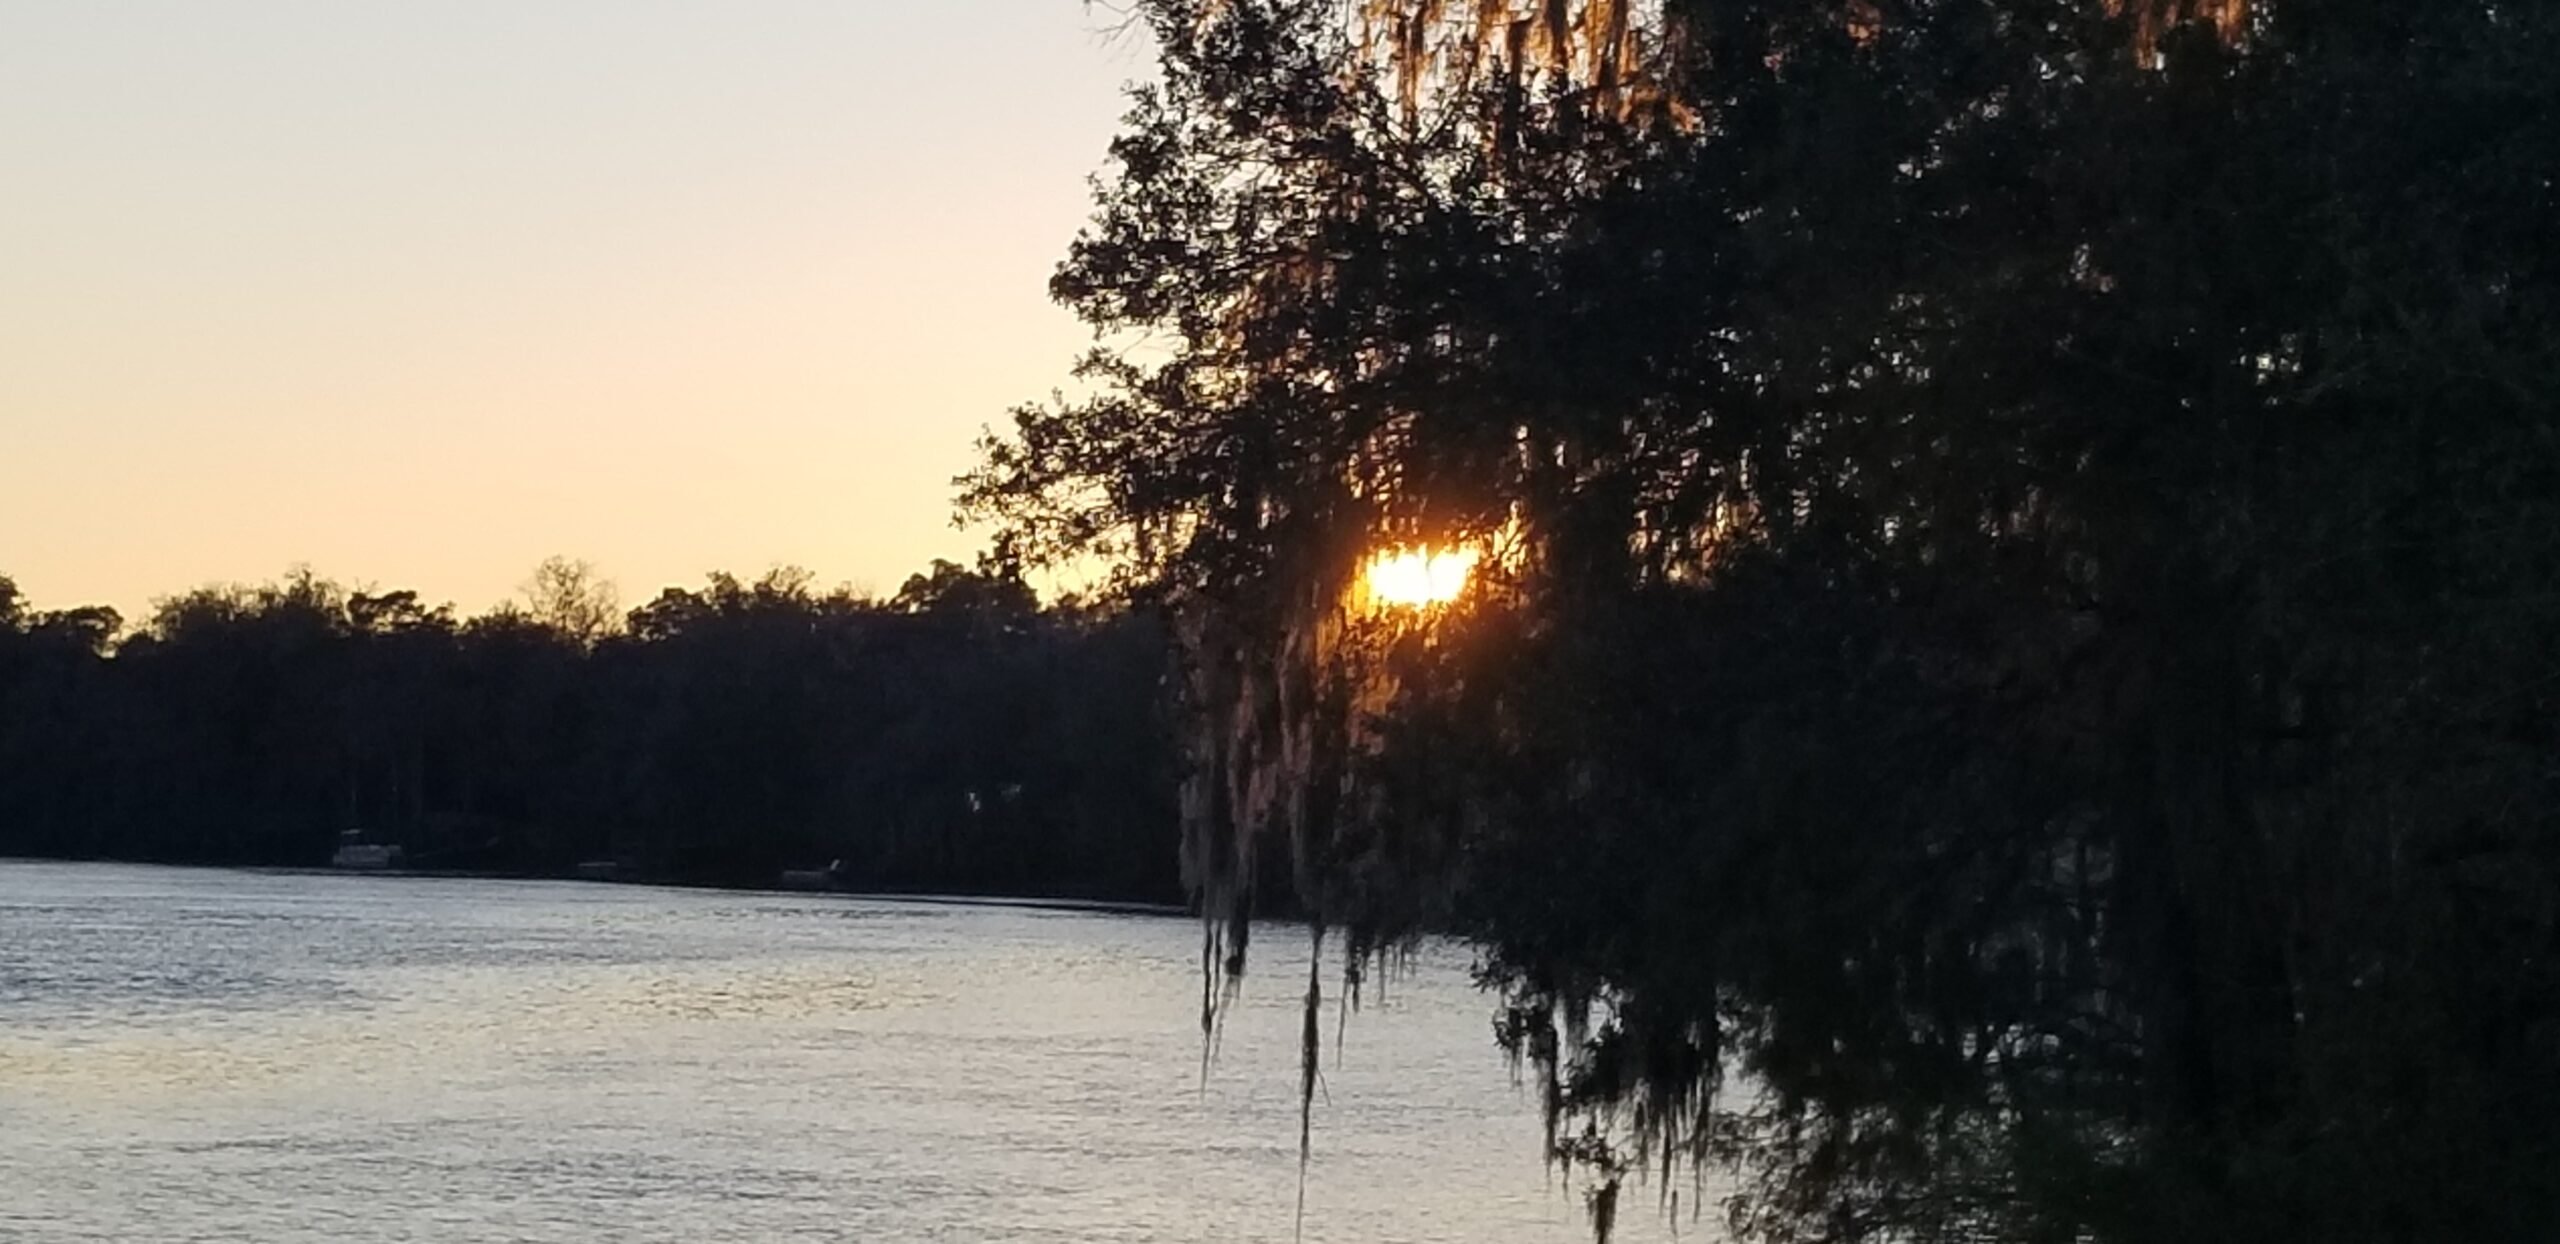 view of the water and sunset from Florida, one of the best places to go RVing in the spring